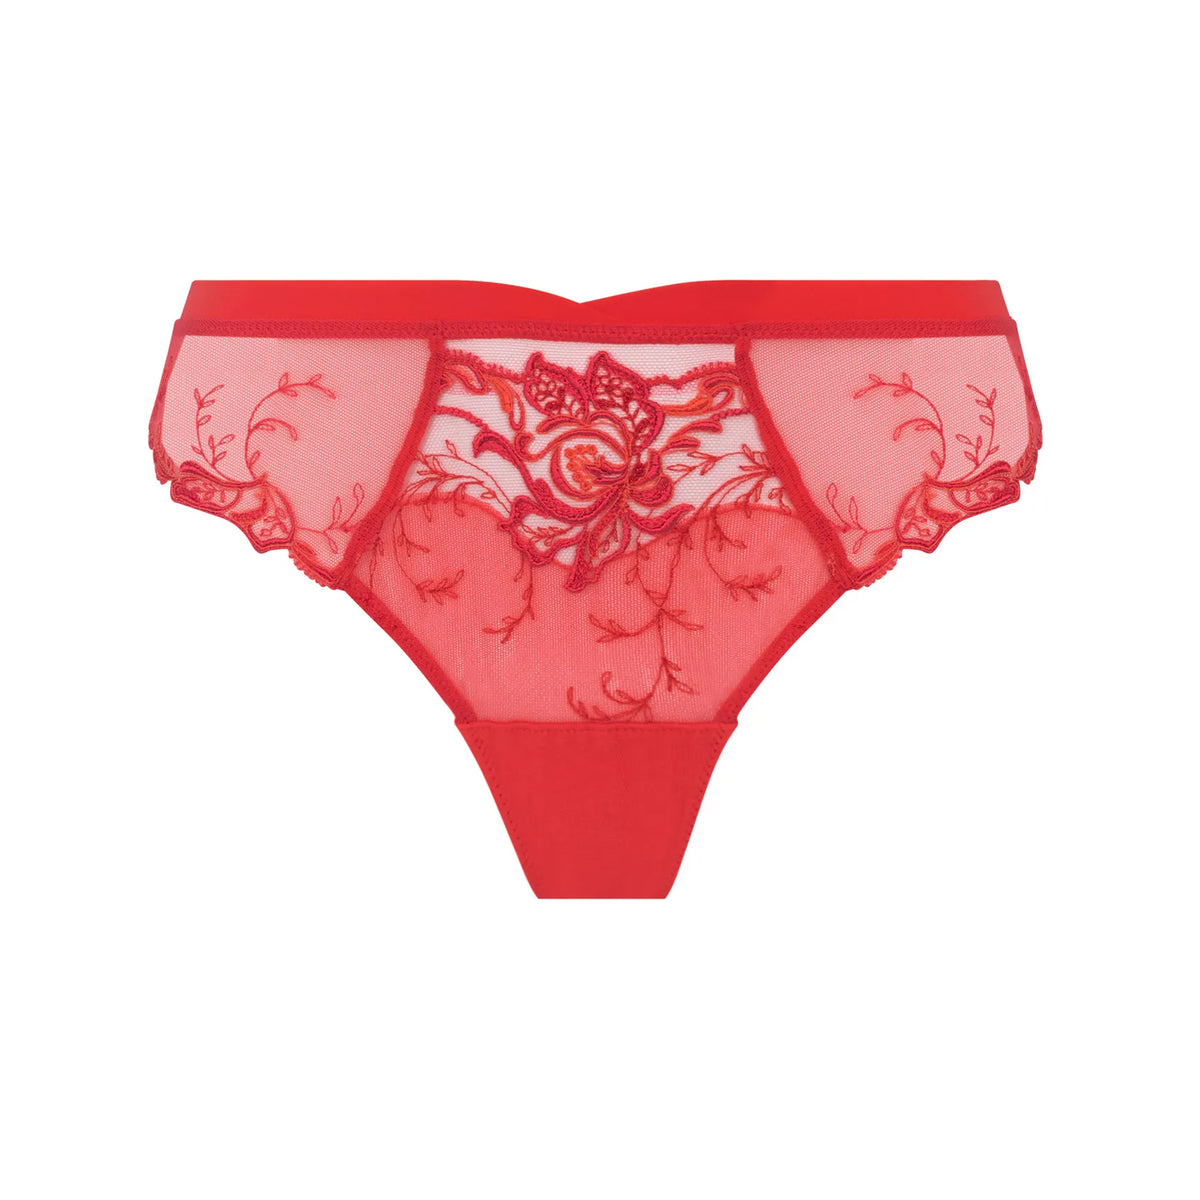 Lily Pad Lingerie - SCARLET RED in MARIE JO's Avero bra and panty